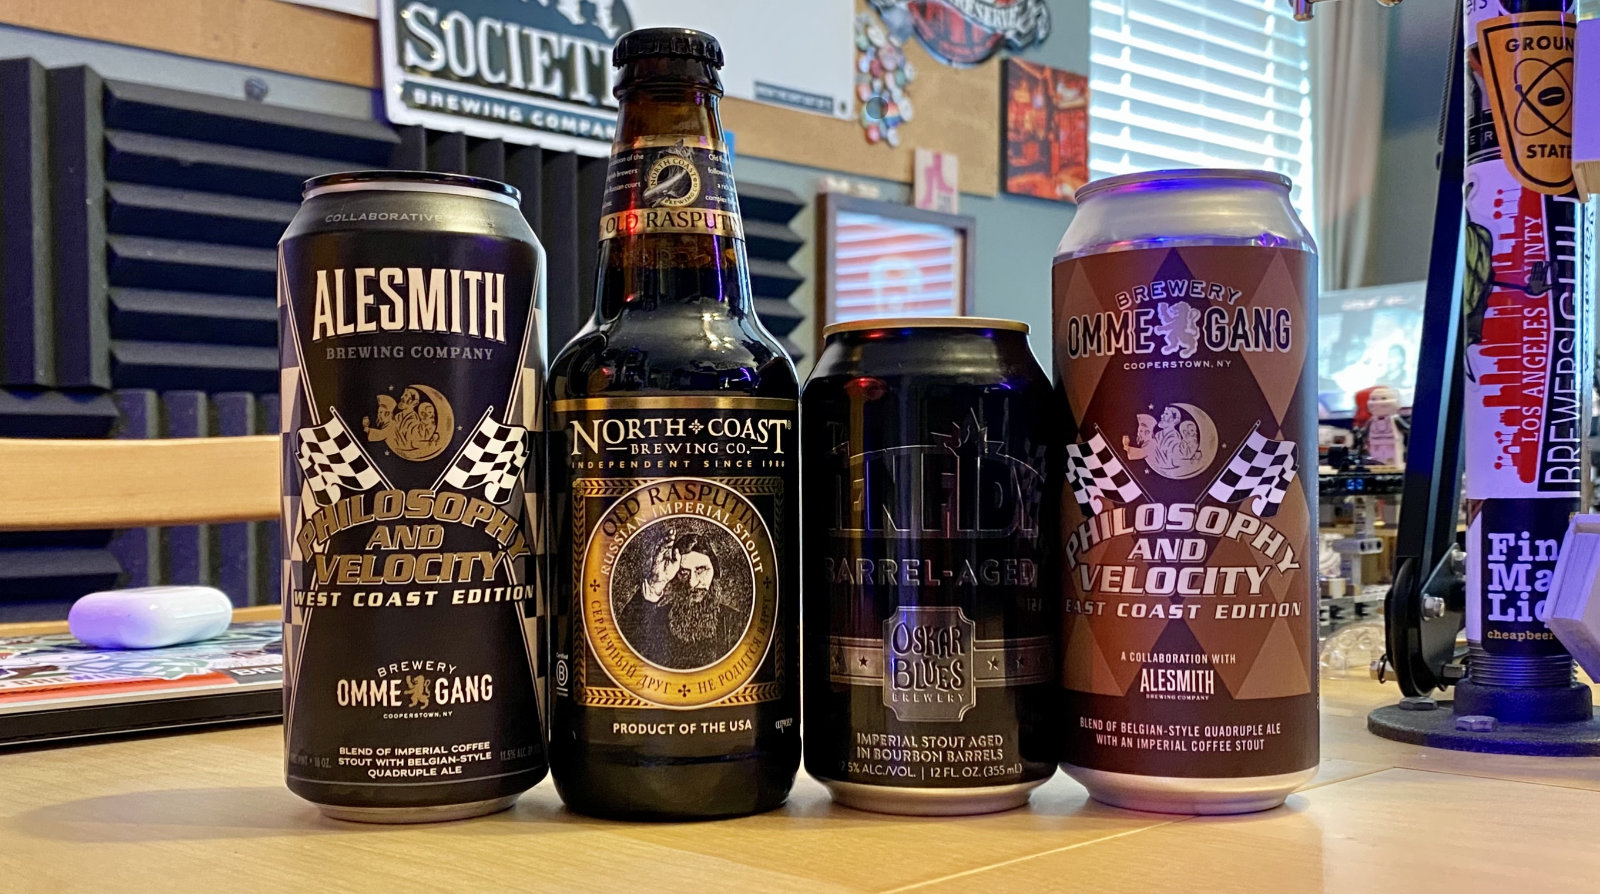 Pictured: Spooky beers!